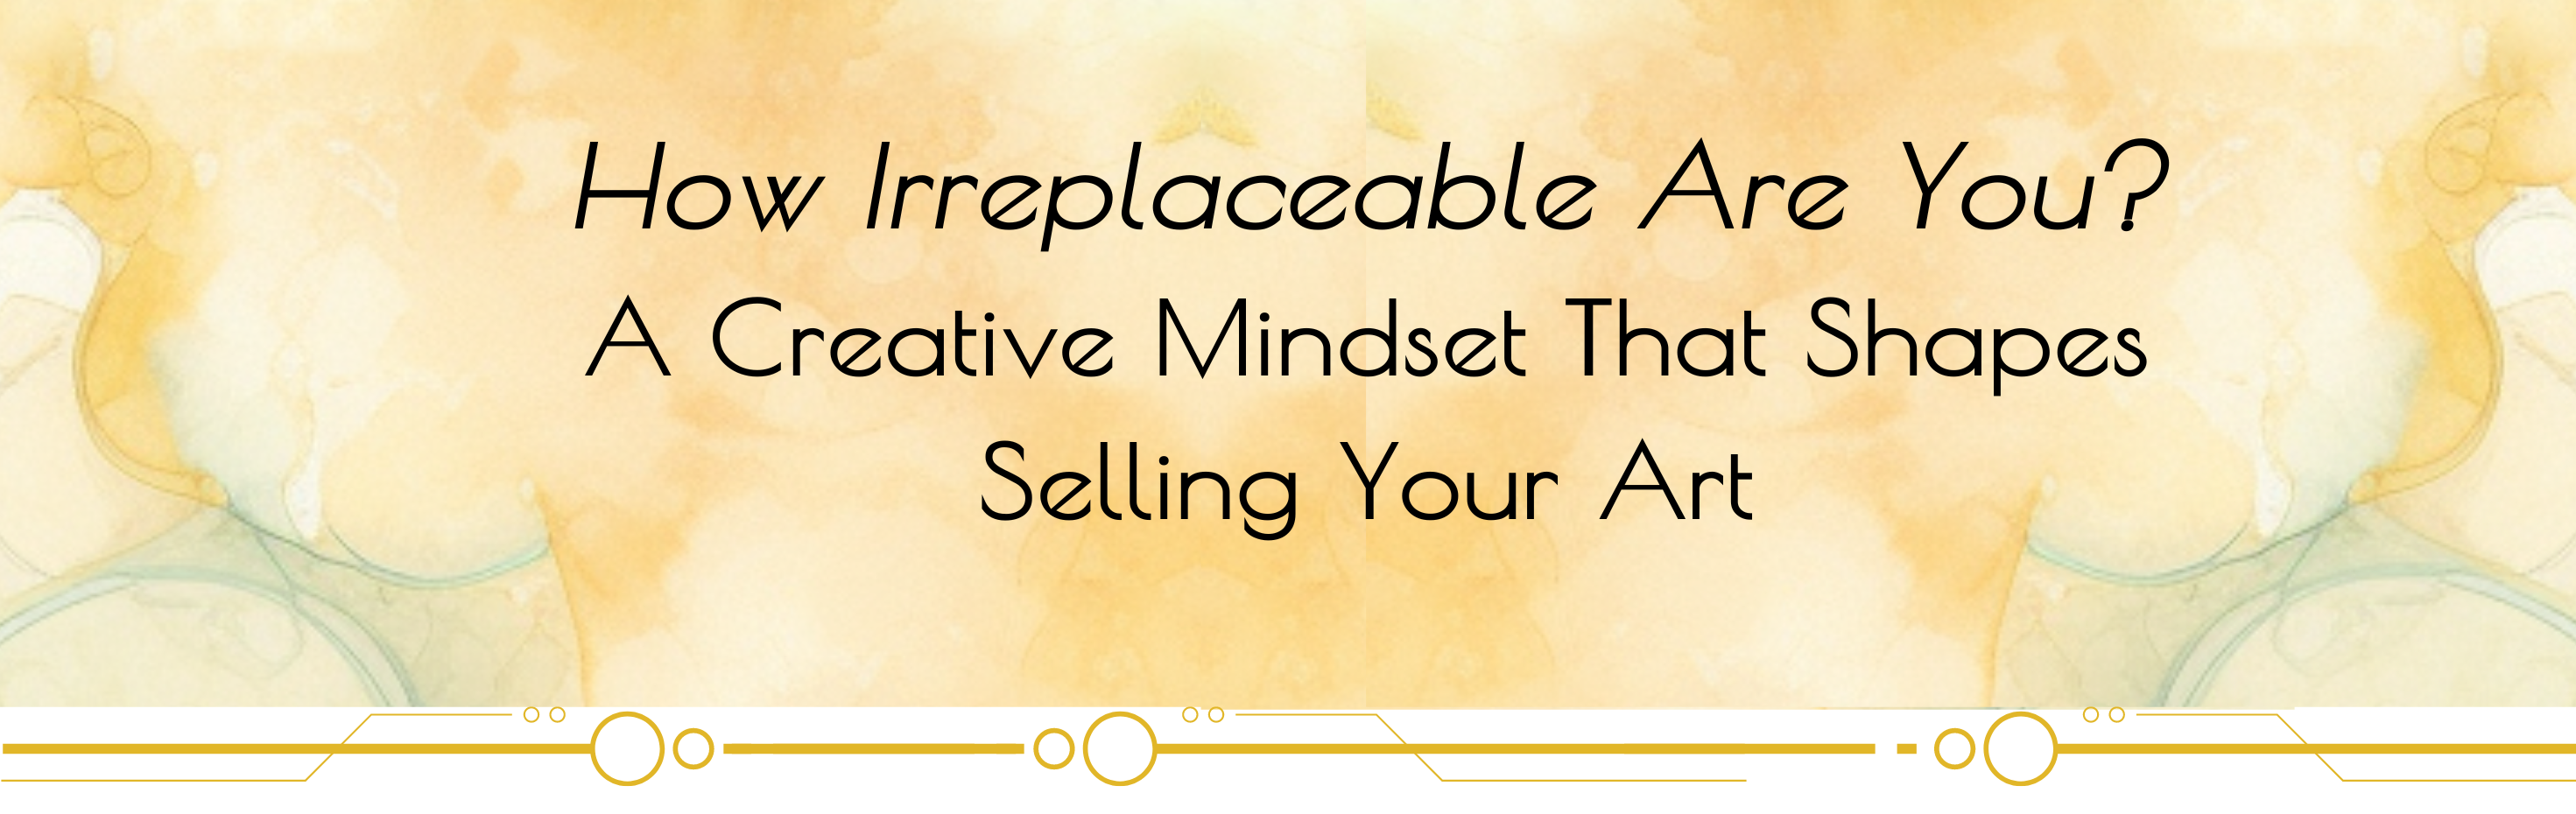 How Irreplaceable Are You? A Creative Mindset That Shapes Selling Your Art